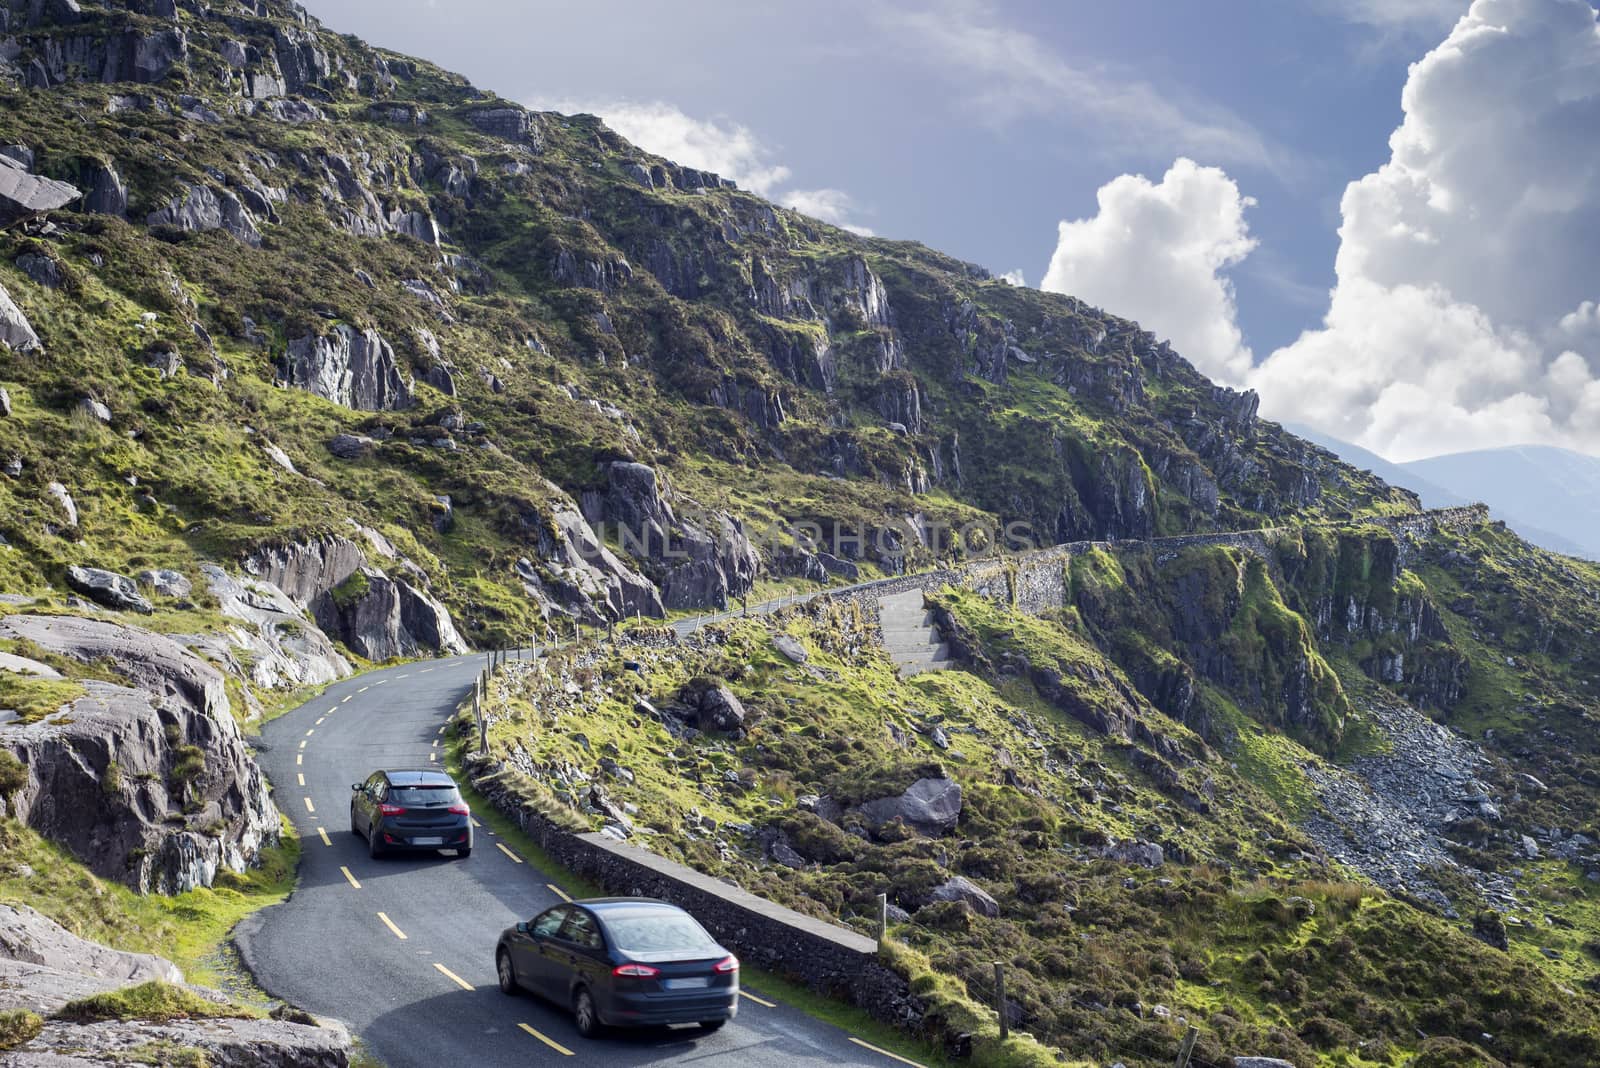 mountains and cliffs at the conor pass on the ring of kerry's wild atlantic way